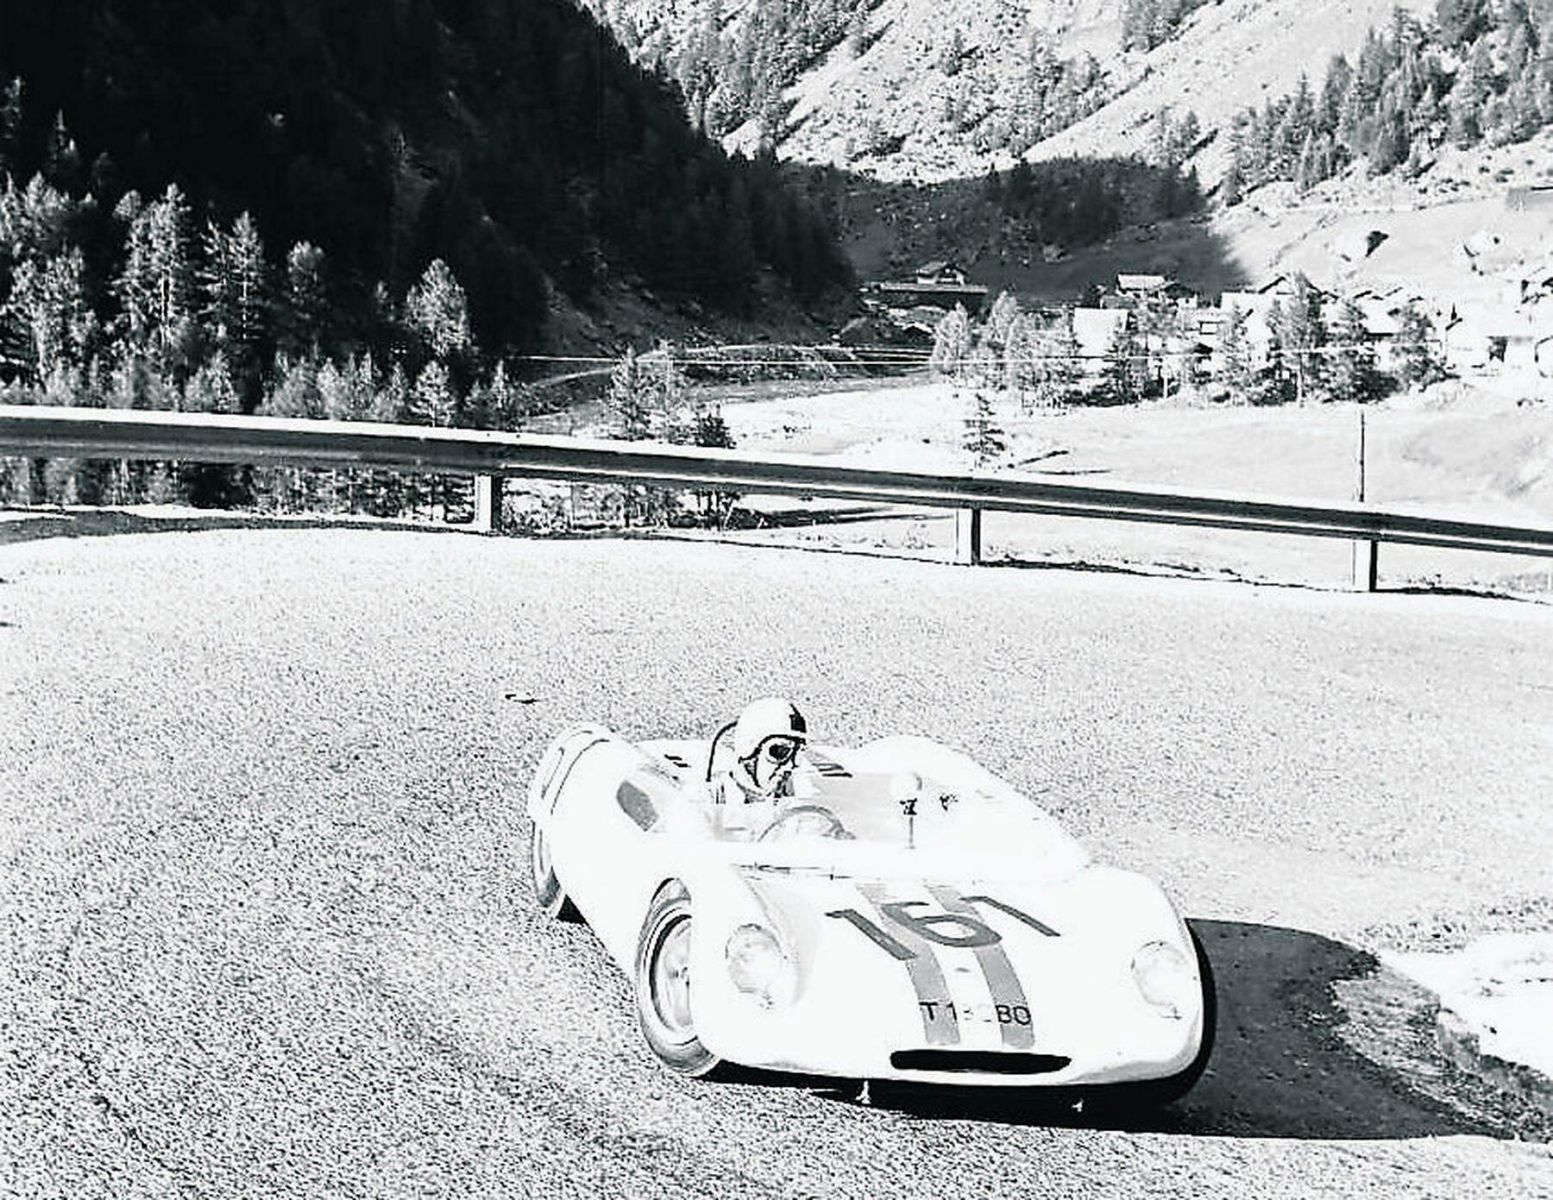 Alban Scheiber 1963 in his Lotus 23